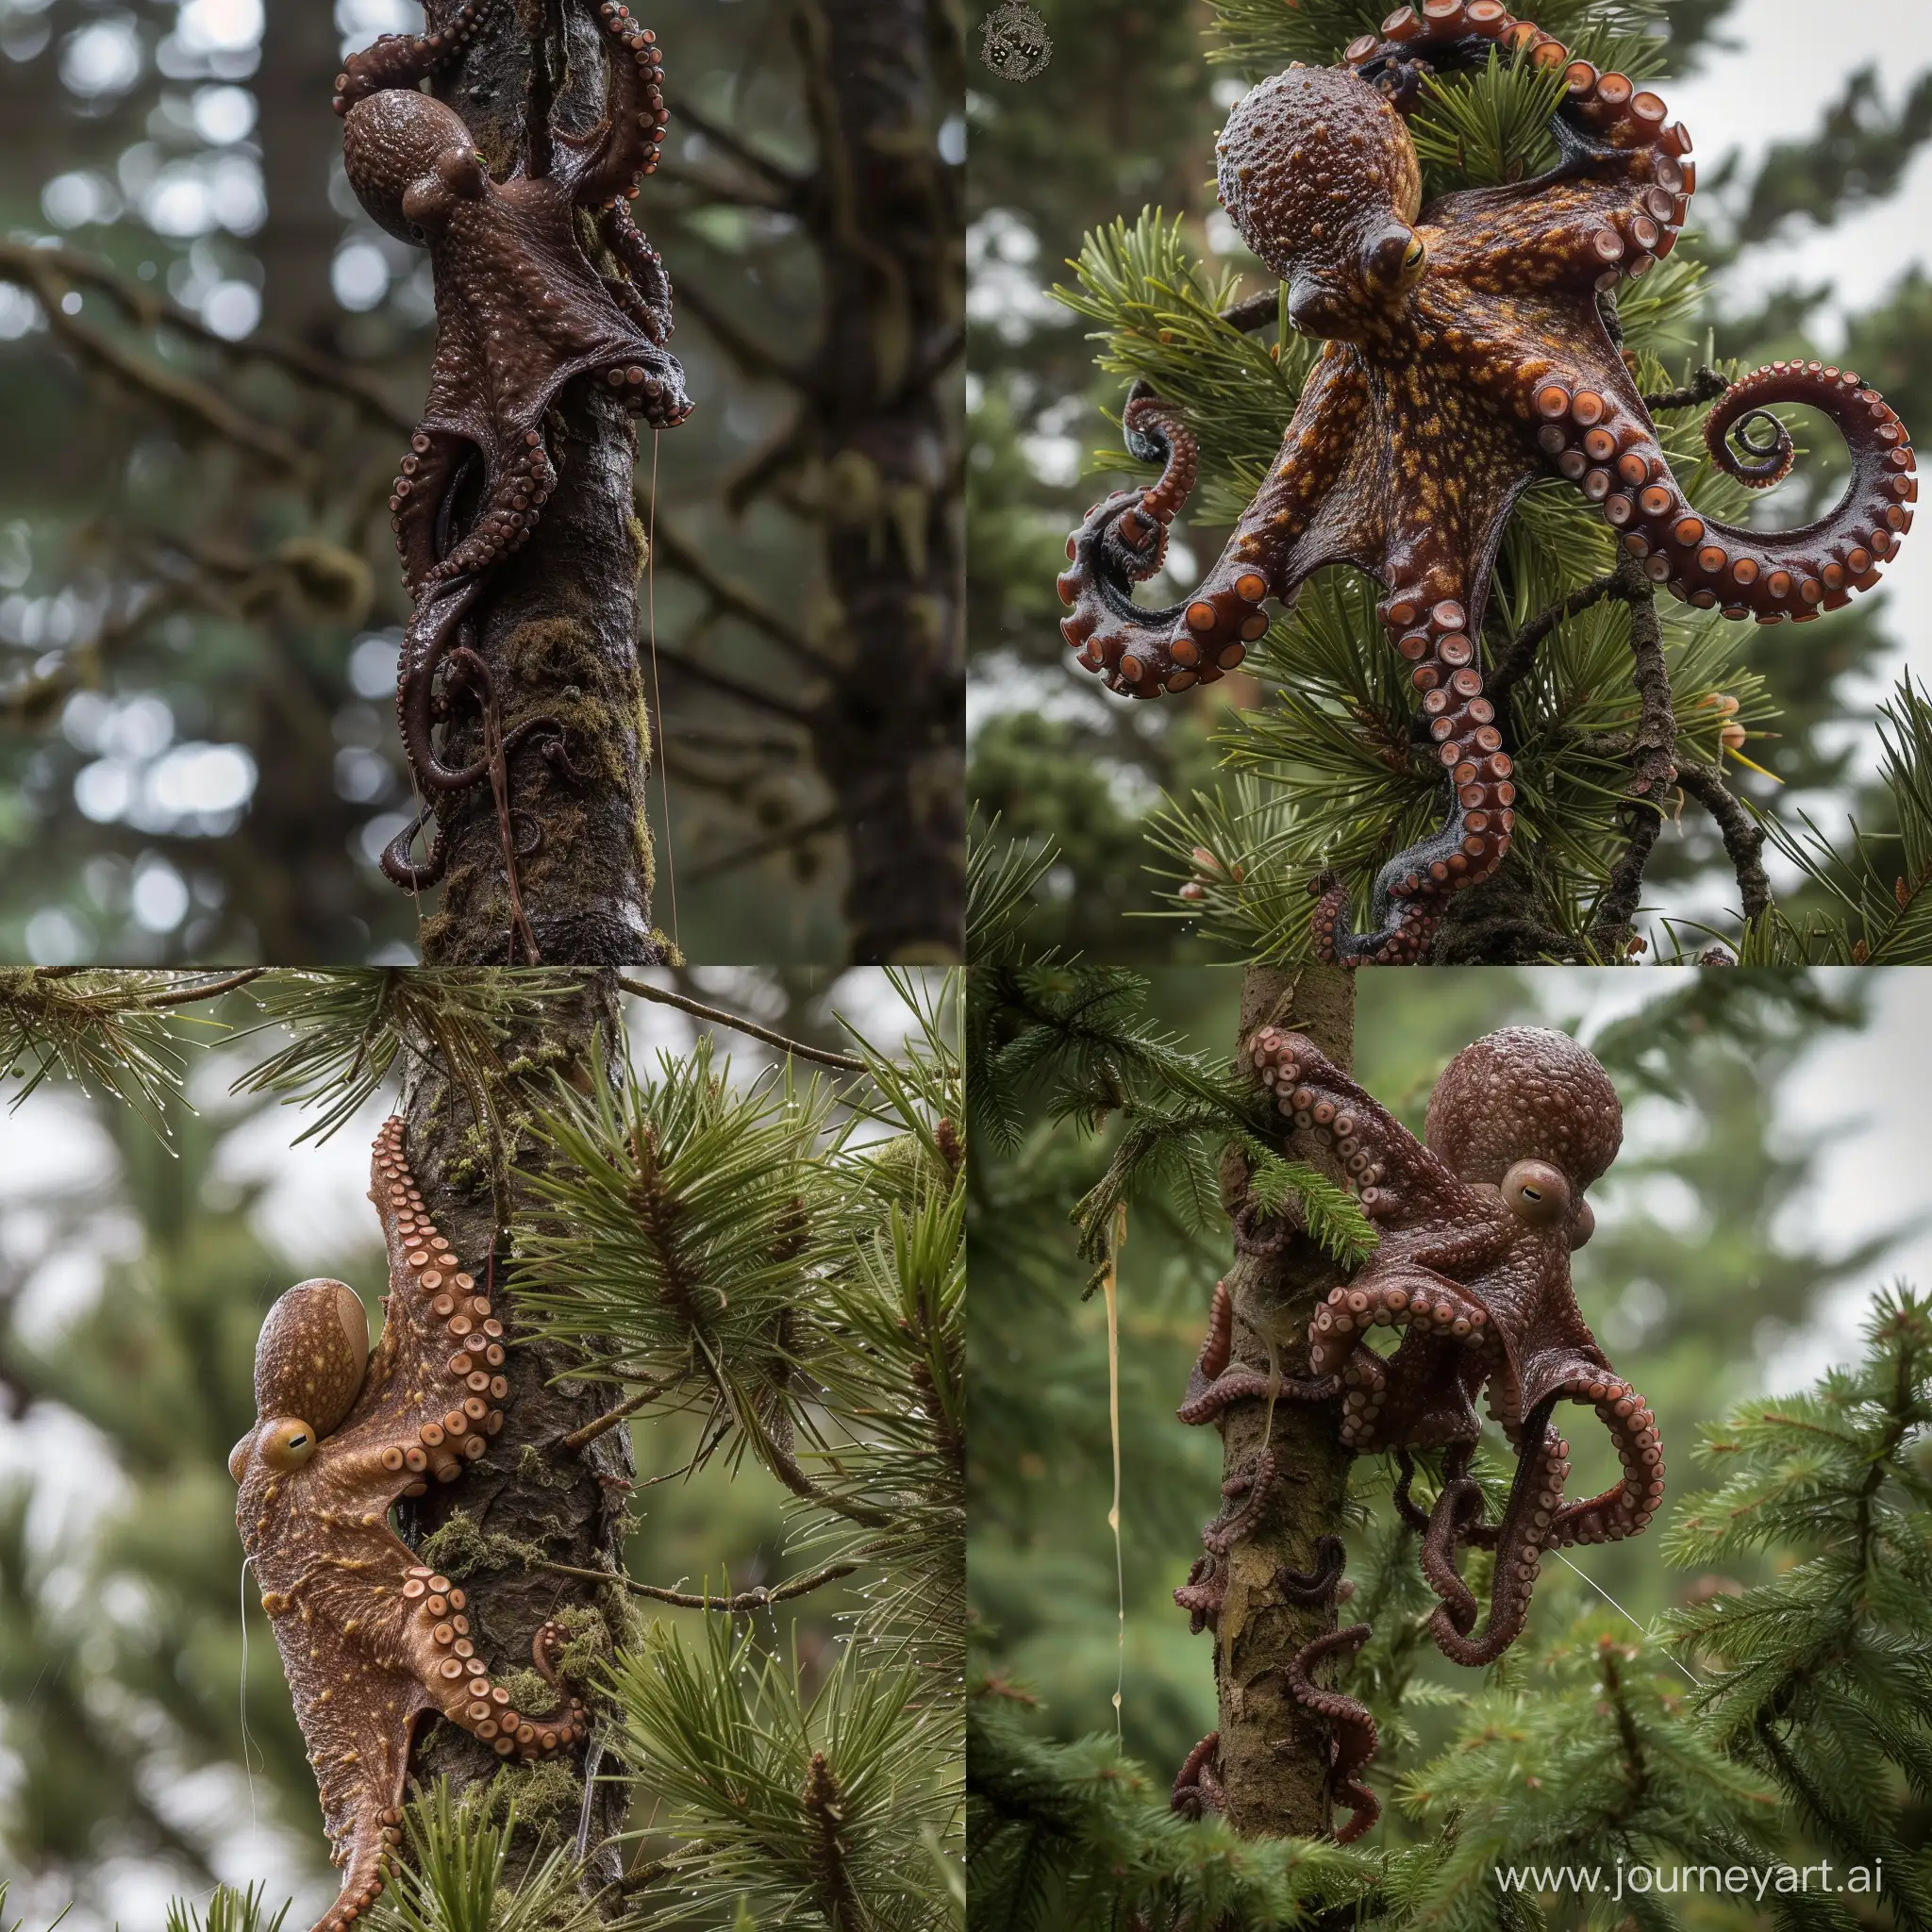 award winning wildlife photo of an slimy wet mottled brown octopus scaling a tall pine tree, grabbing branches with its tentacles, slime trail, temperate pine rainforest, daylight, telephoto lens, canon camera, wide shot, shot from below, Frans Lanting